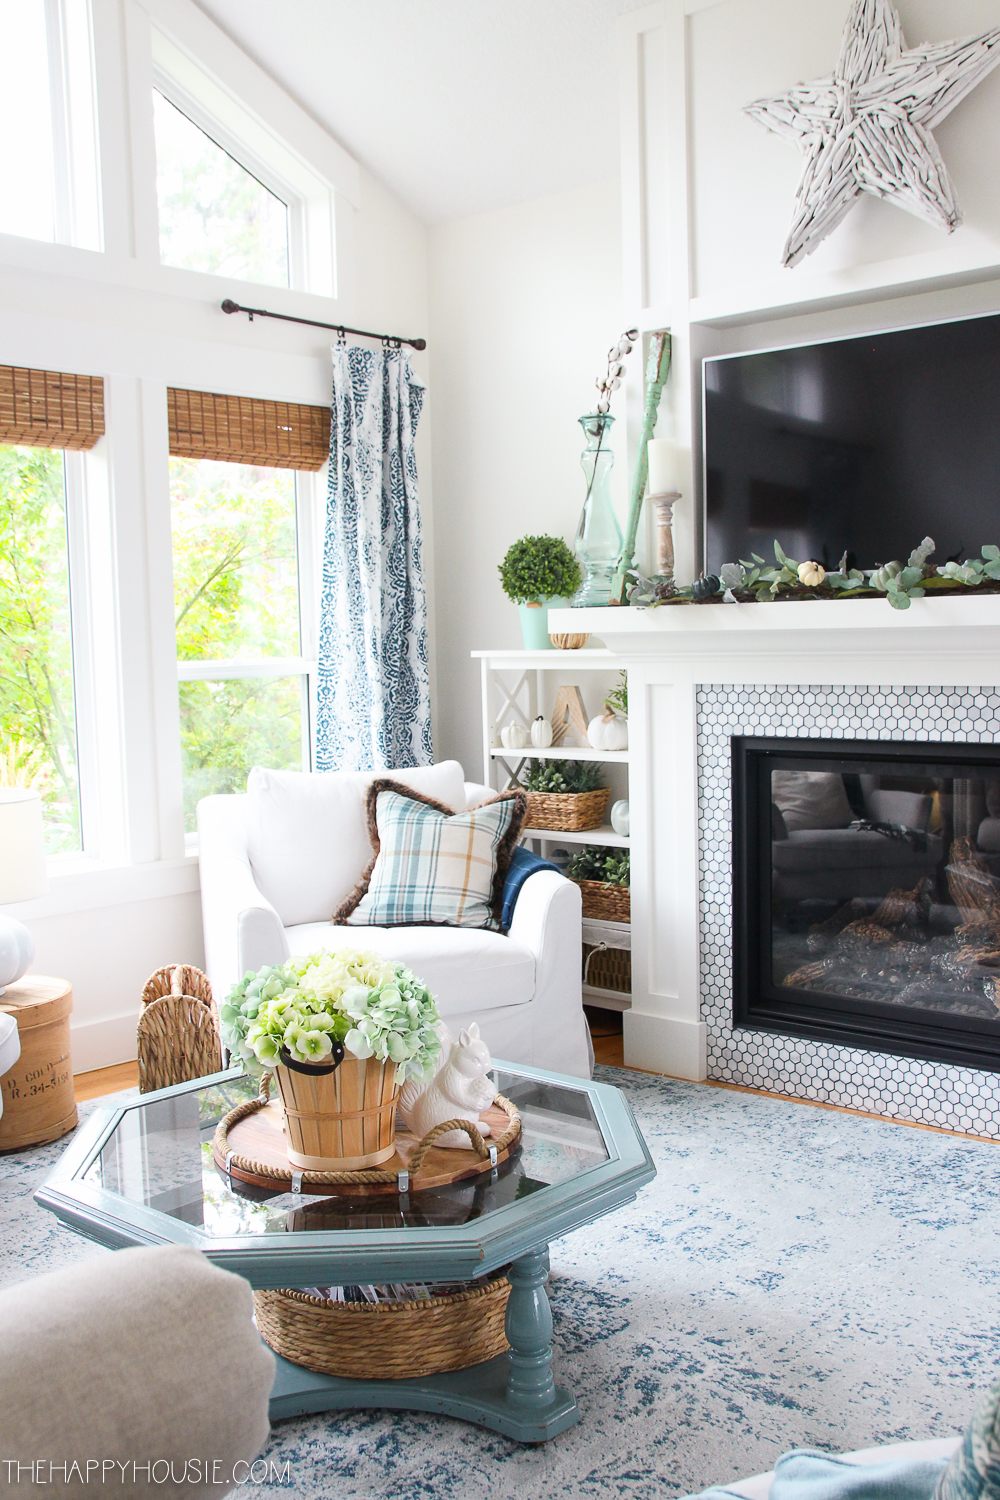 A blue tinged coffee table in the living room with a fireplace.